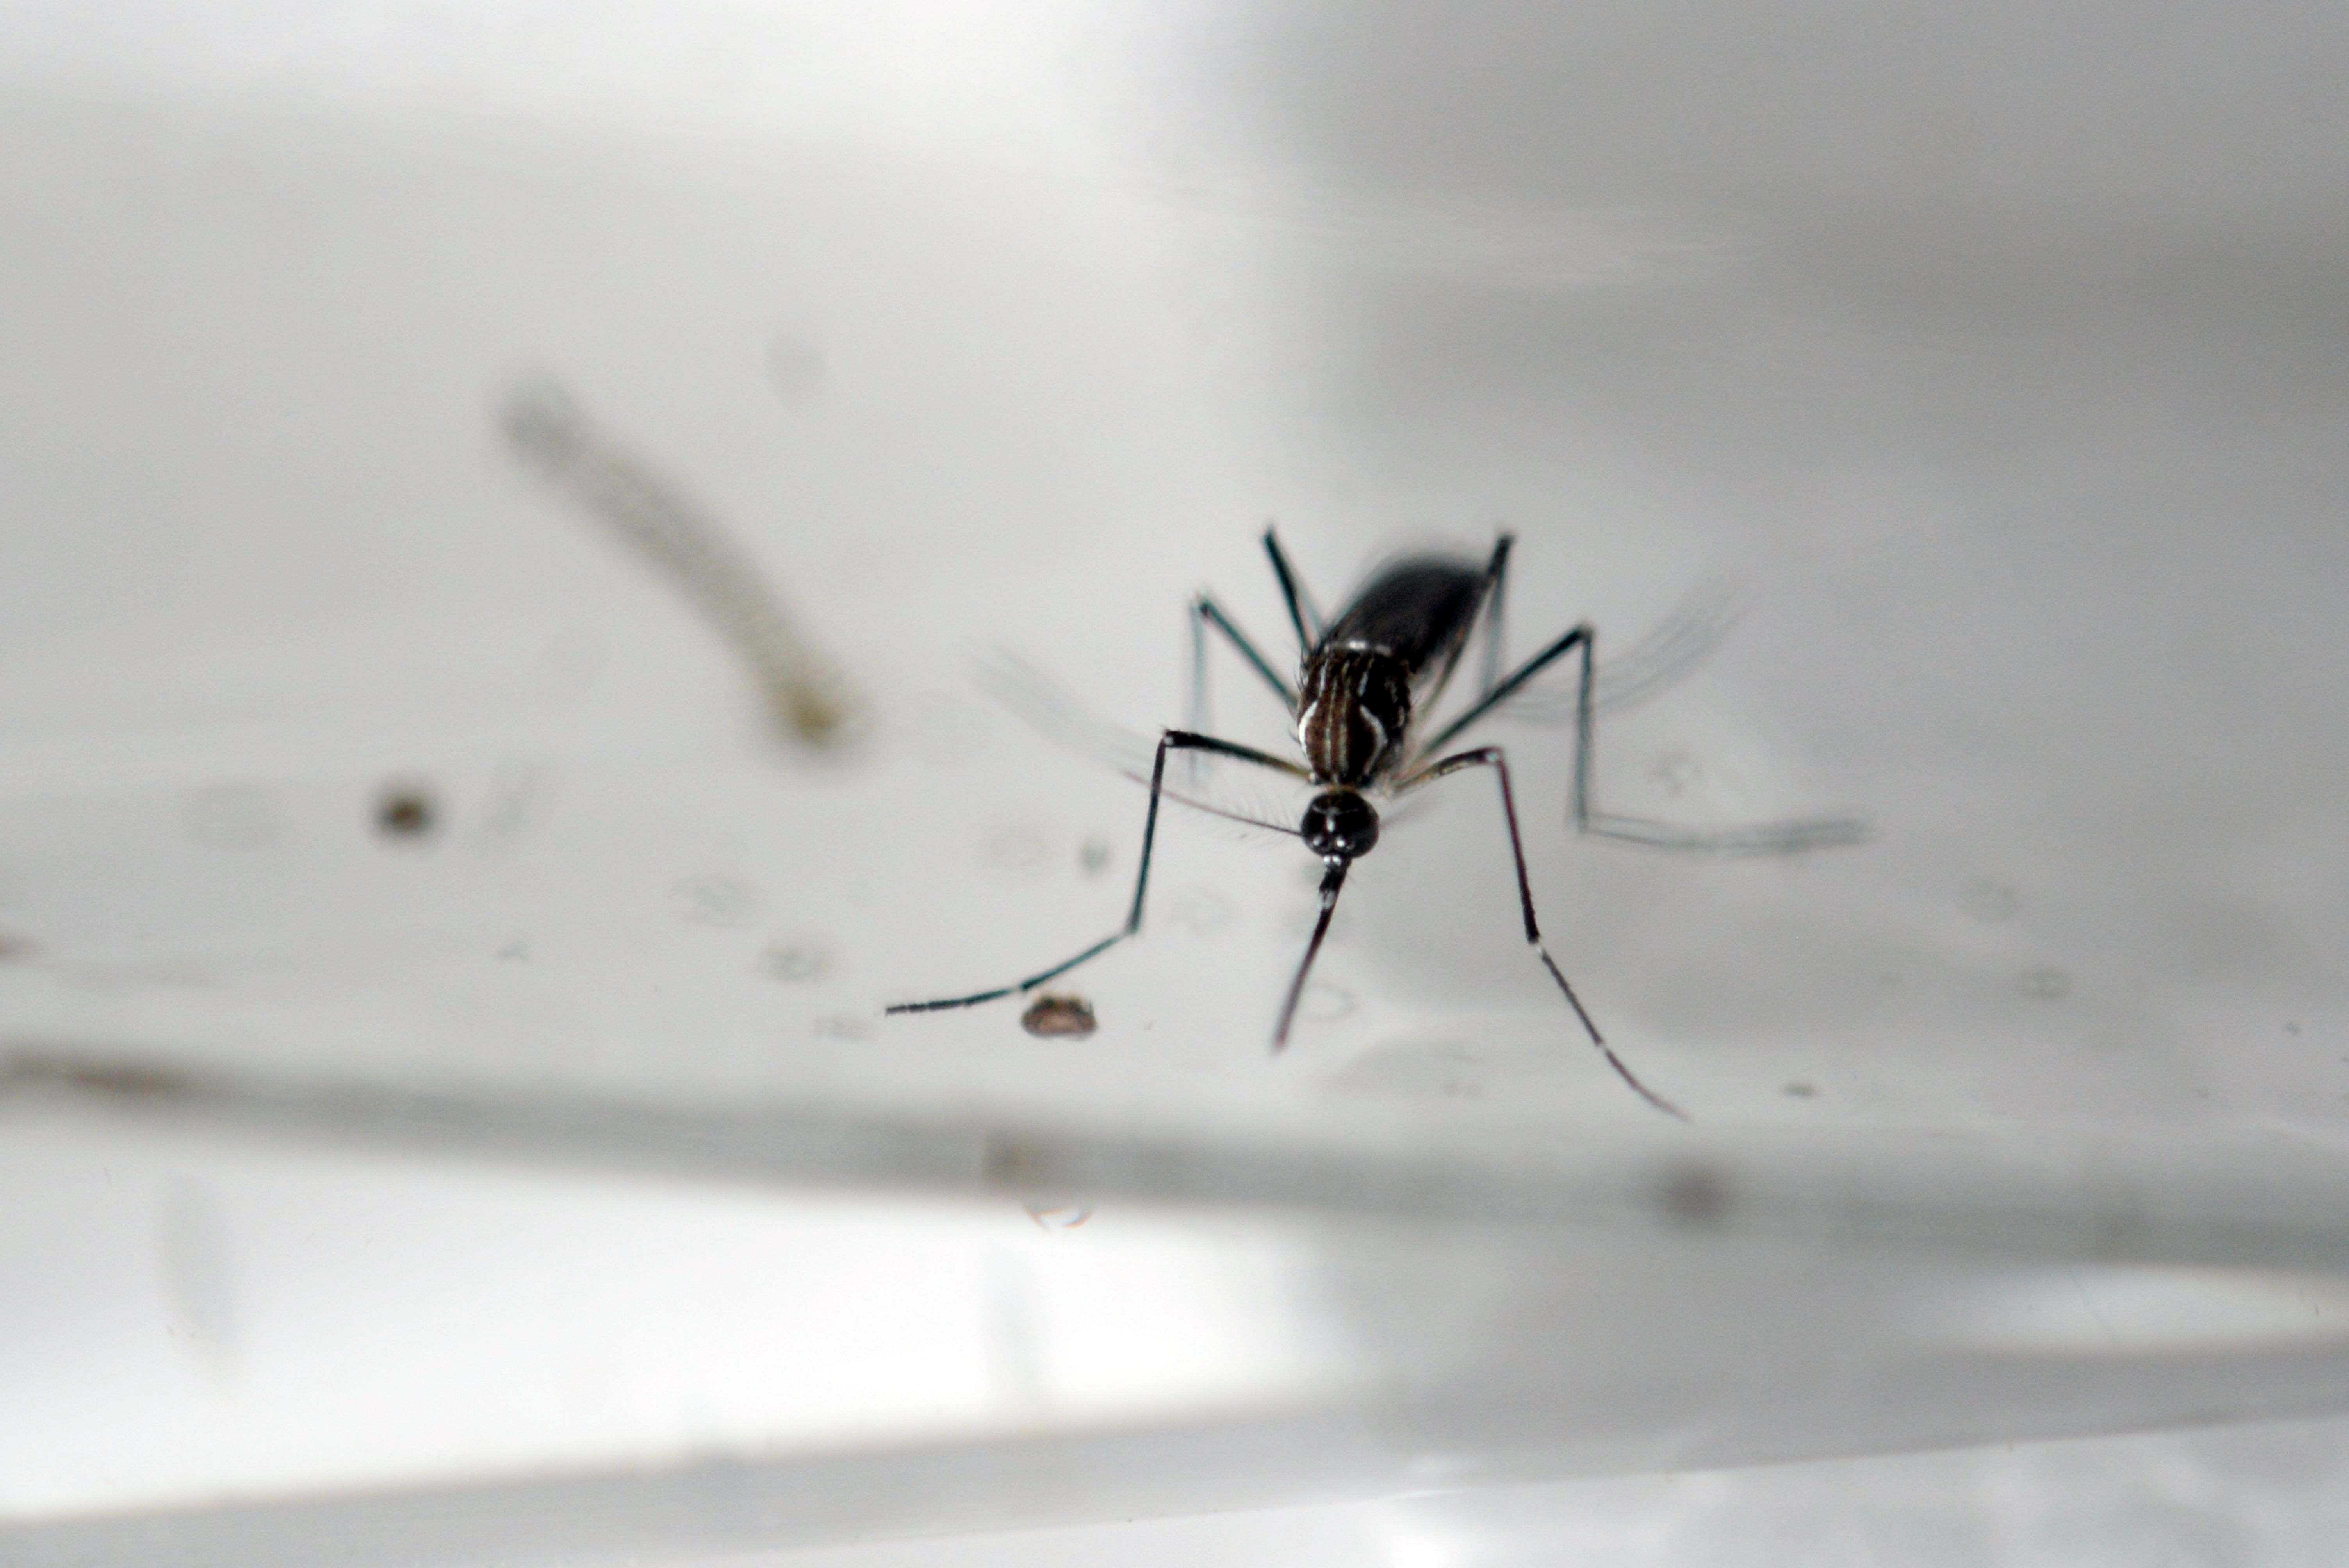 An Aedes Aegypti mosquito is photographed in a laboratory of control of epidemiological vectors in San Salvador, on January 27, 2016. (Getty)